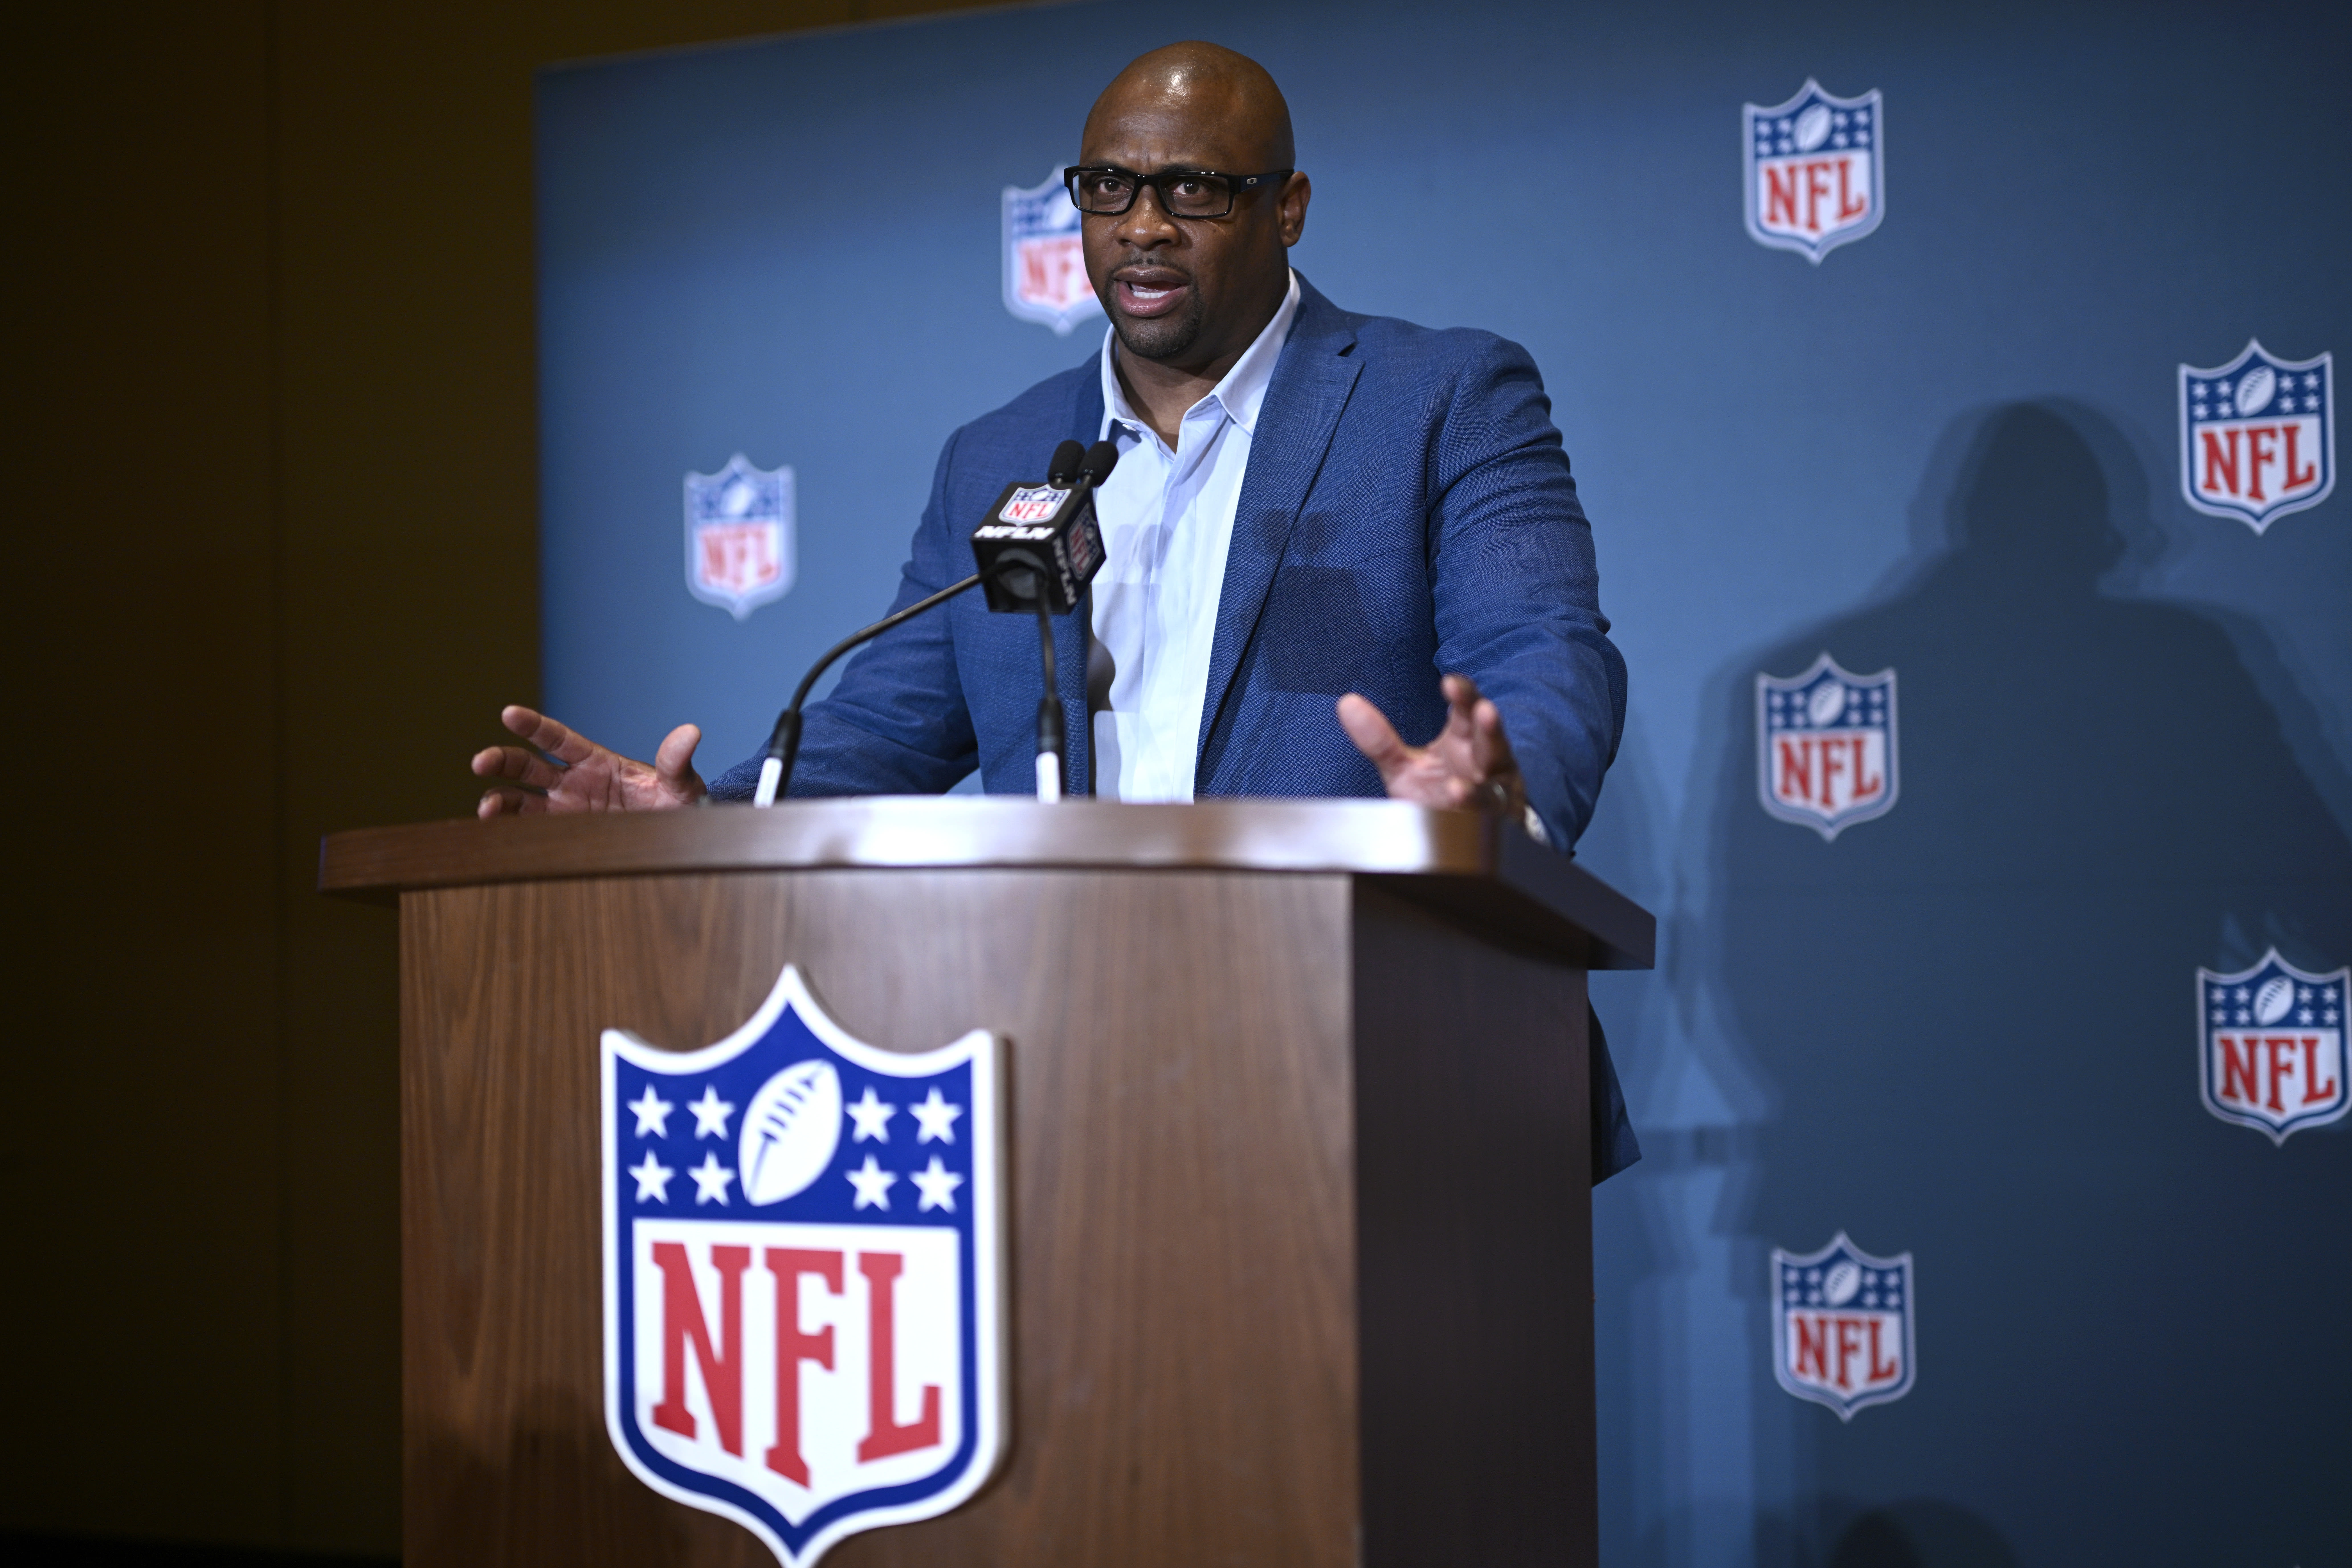 NFL’s Troy Vincent on rule changes and dealing with criticism: 'It's about preserving the game'